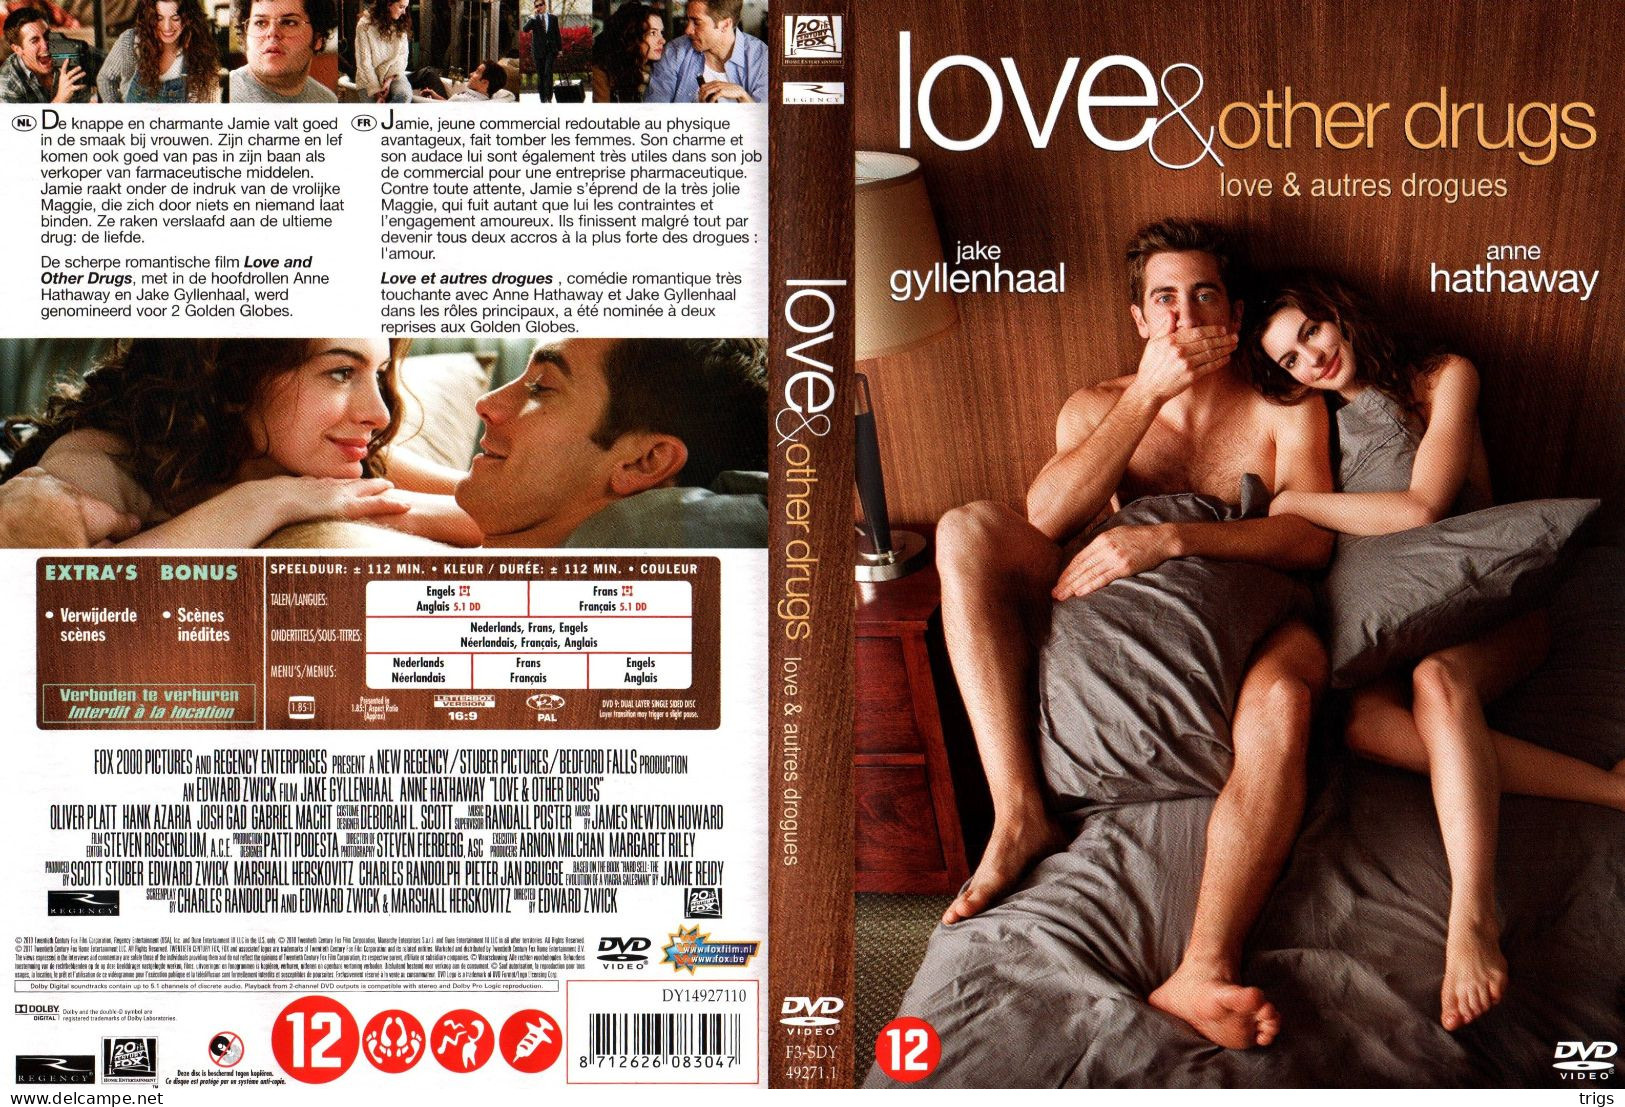 DVD - Love & Other Drugs - Cómedia